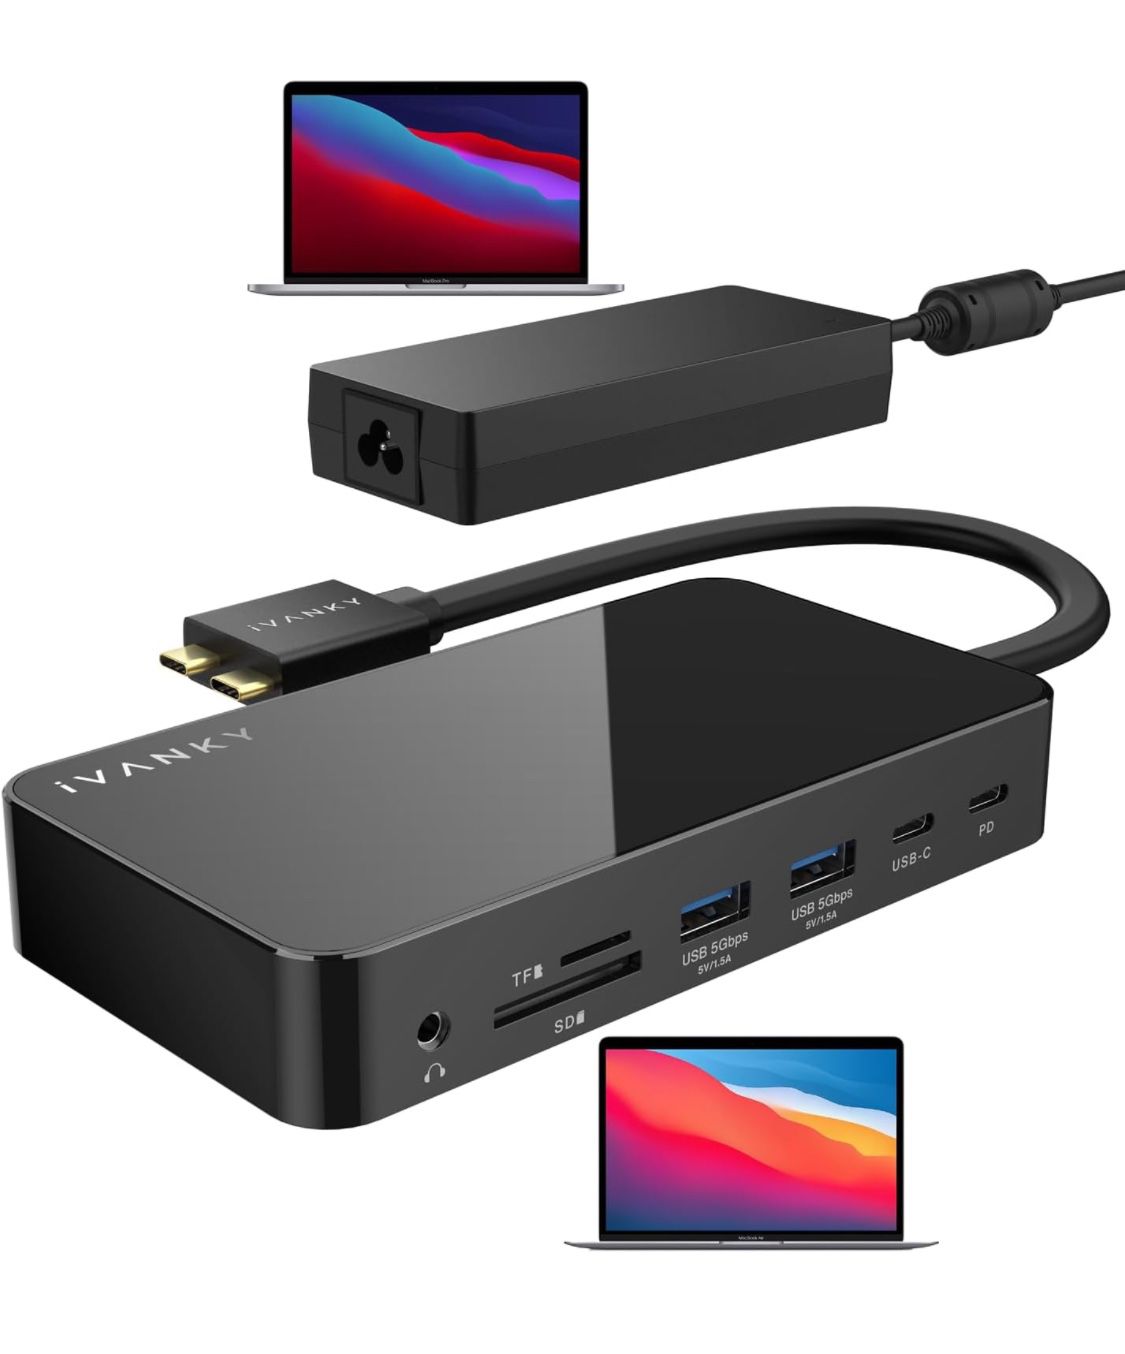 iVANKY FusionDock 1 MacBook Pro Docking Station with 150W Power Adapter, 12-in-2 Dual 4K@60Hz Monitor Dock for MacBook M1/M2/M3 Pro/Max Display Dock